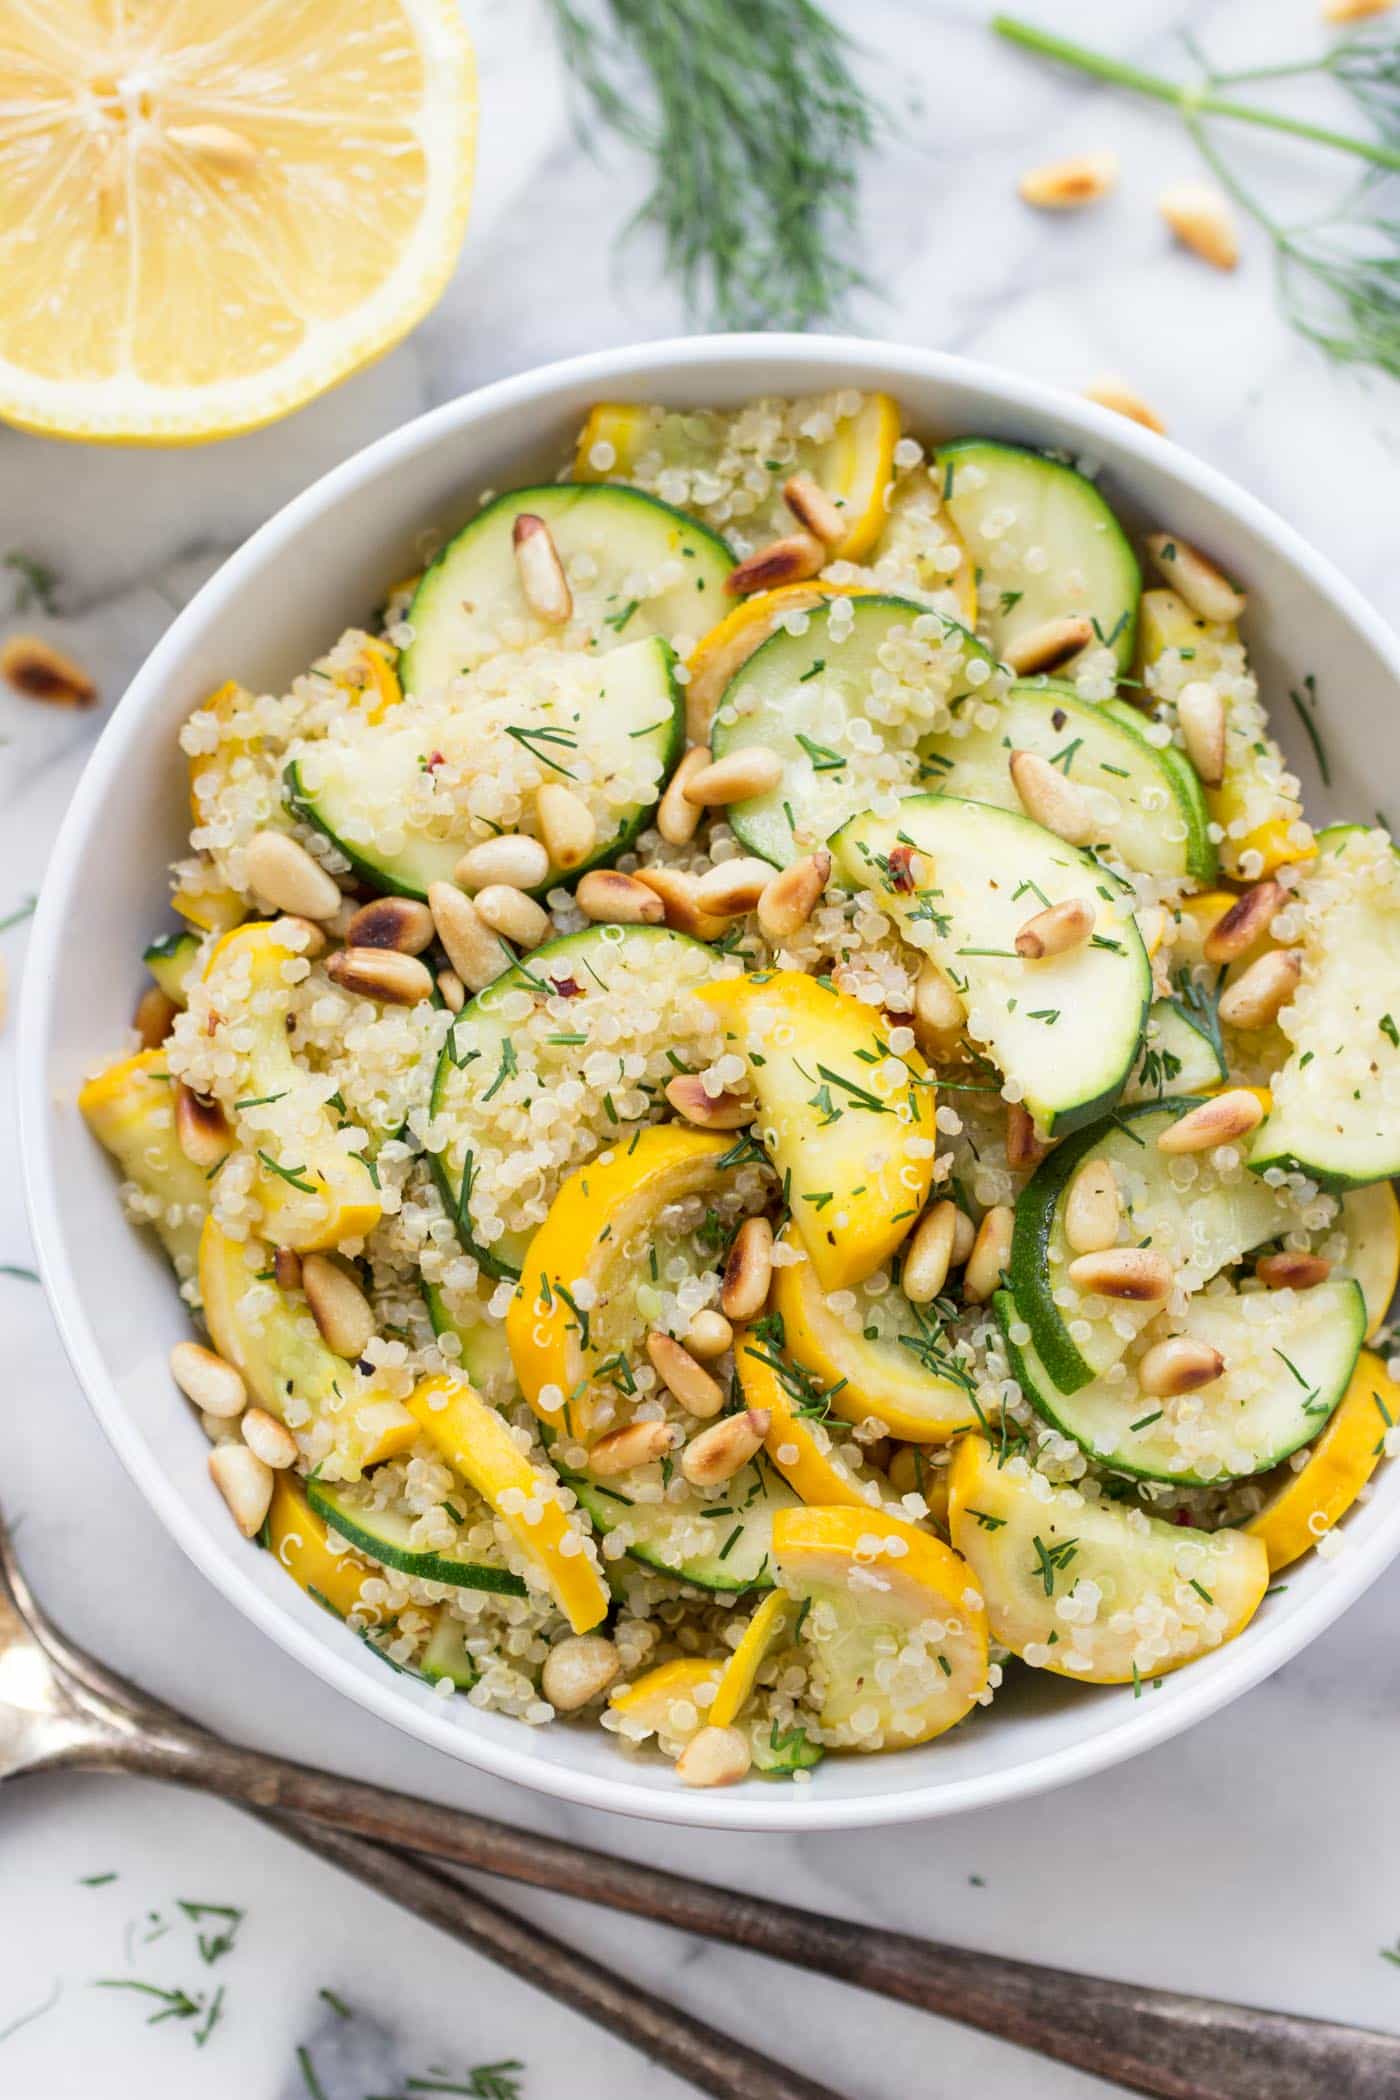 Summer Zucchini Quinoa Salad with warm sauteed vegetables, toasted pine nuts and a dreamy lemon-dill dressing!